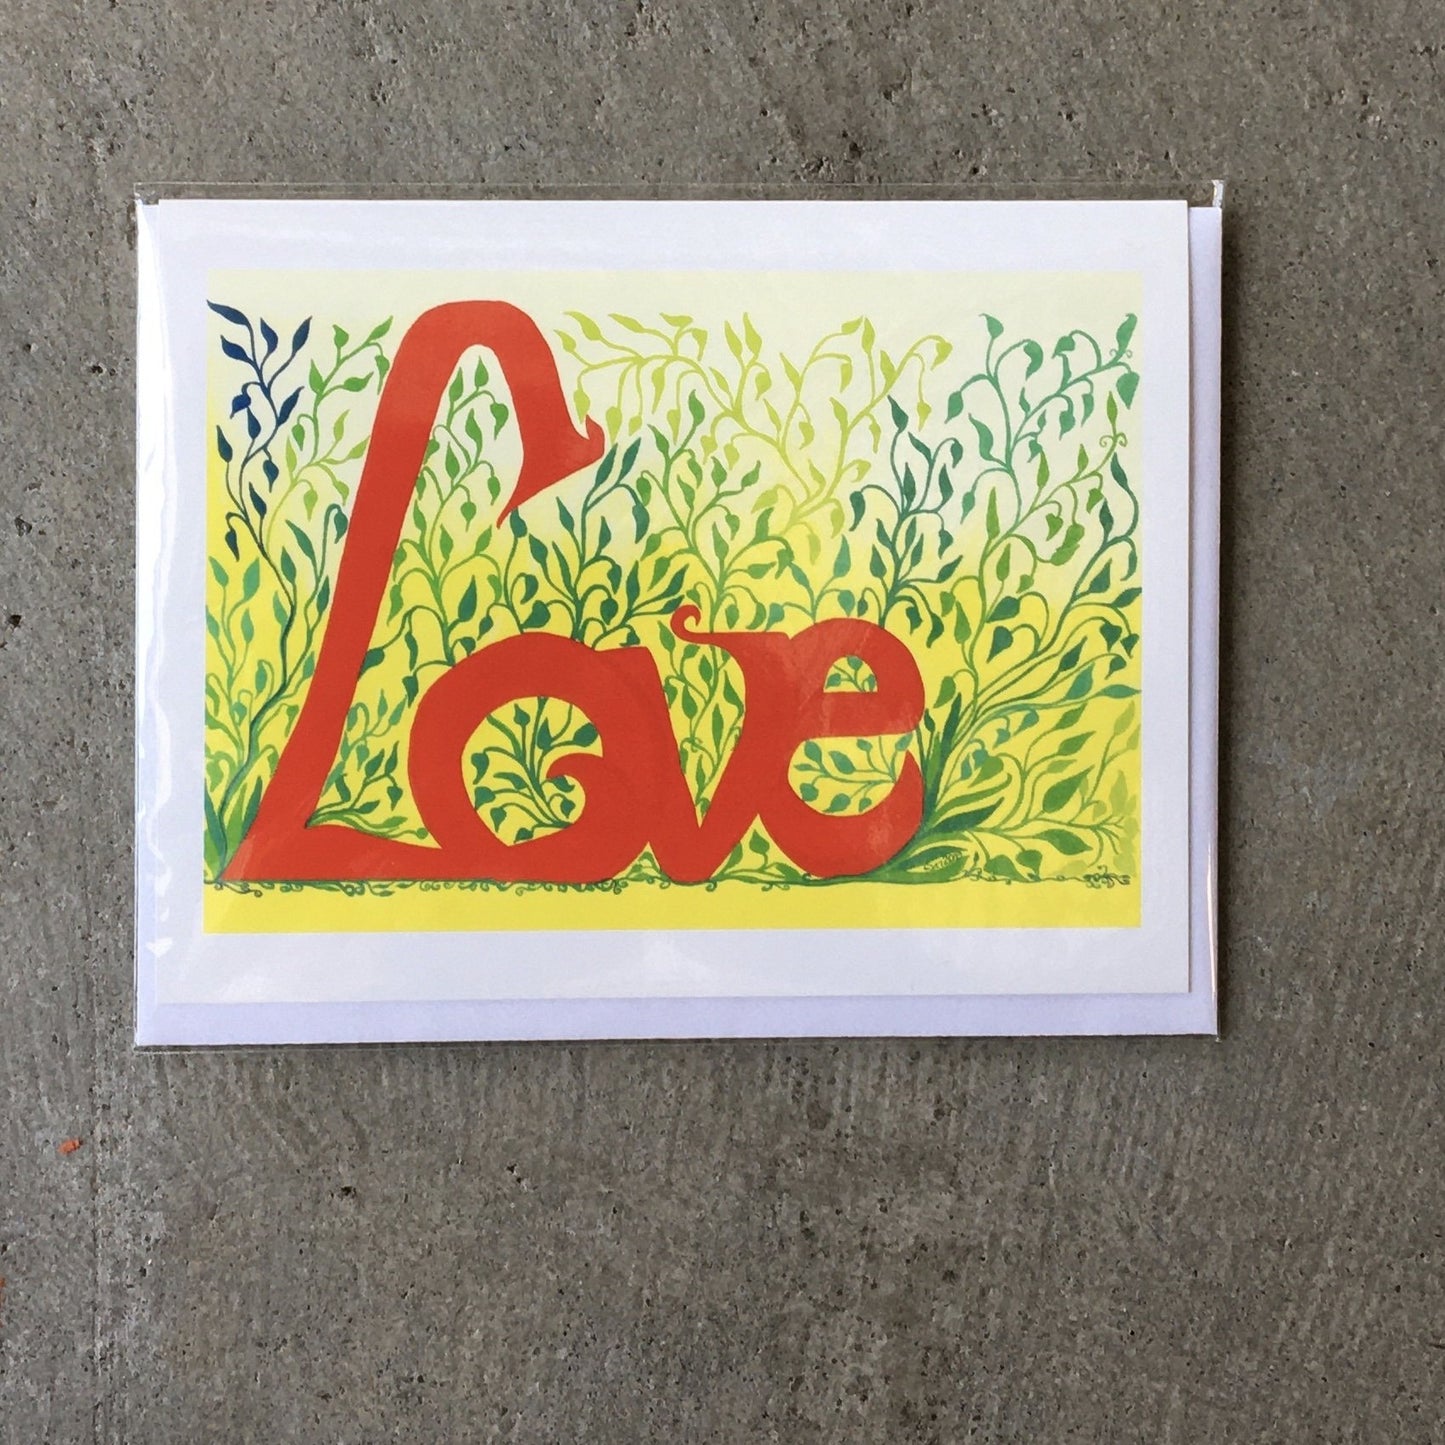 The Power of Love greeting card